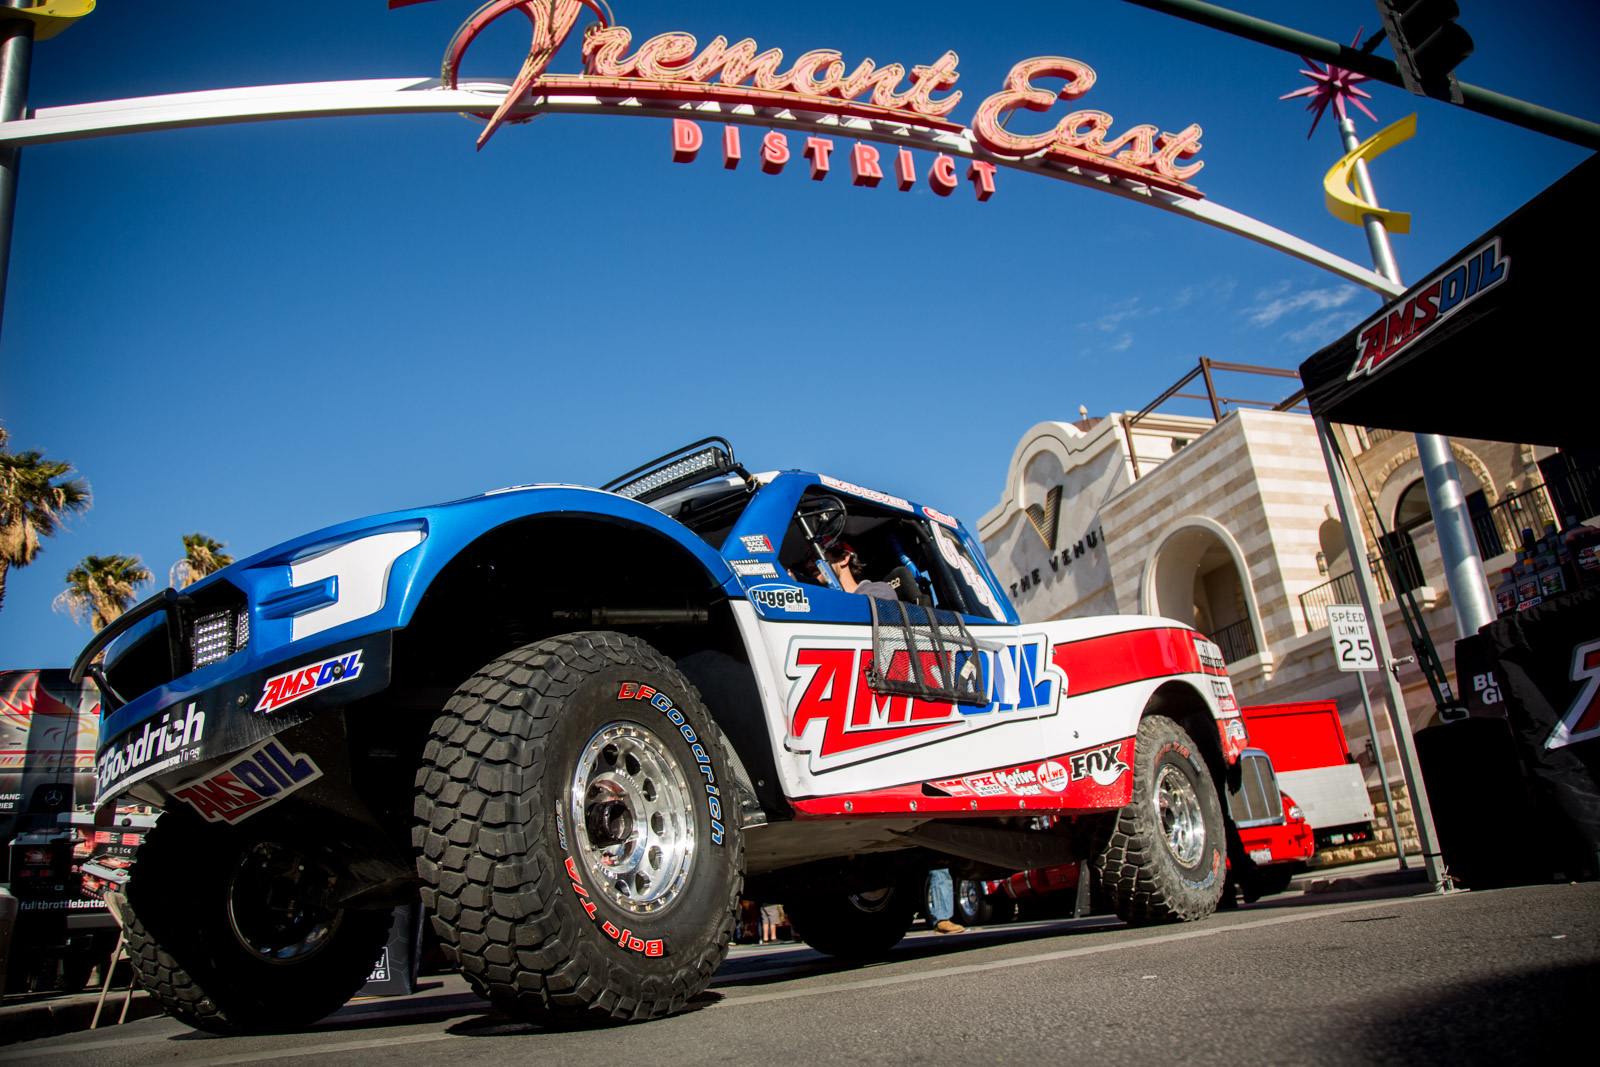 No Fear and Loathing at the Mint 400